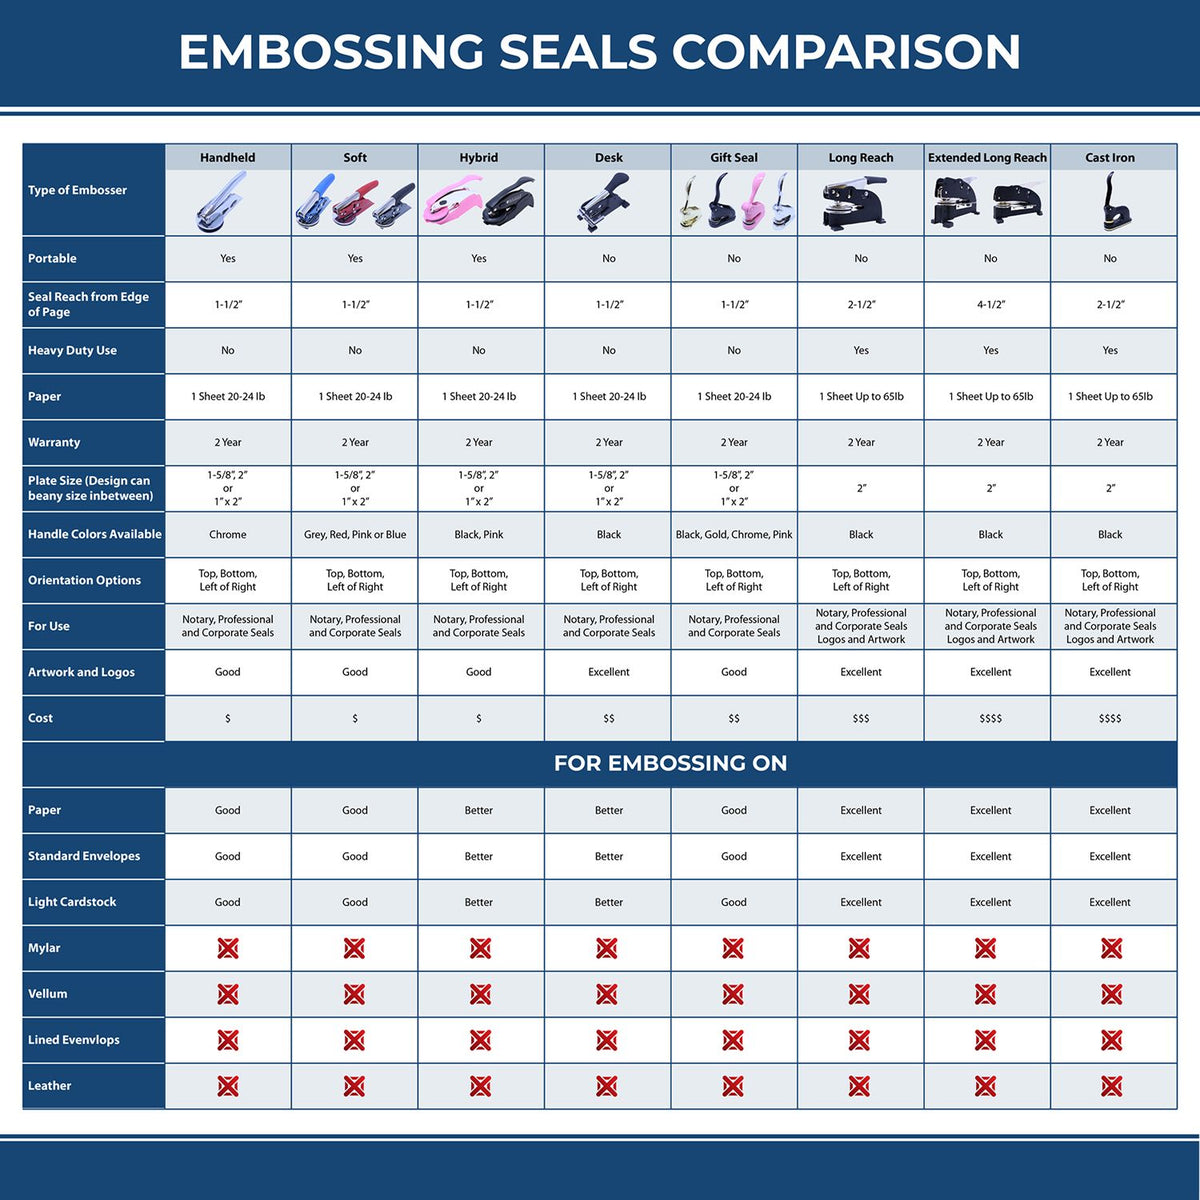 A comparison chart for the different types of mount models available for the Soft North Carolina Professional Engineer Seal.